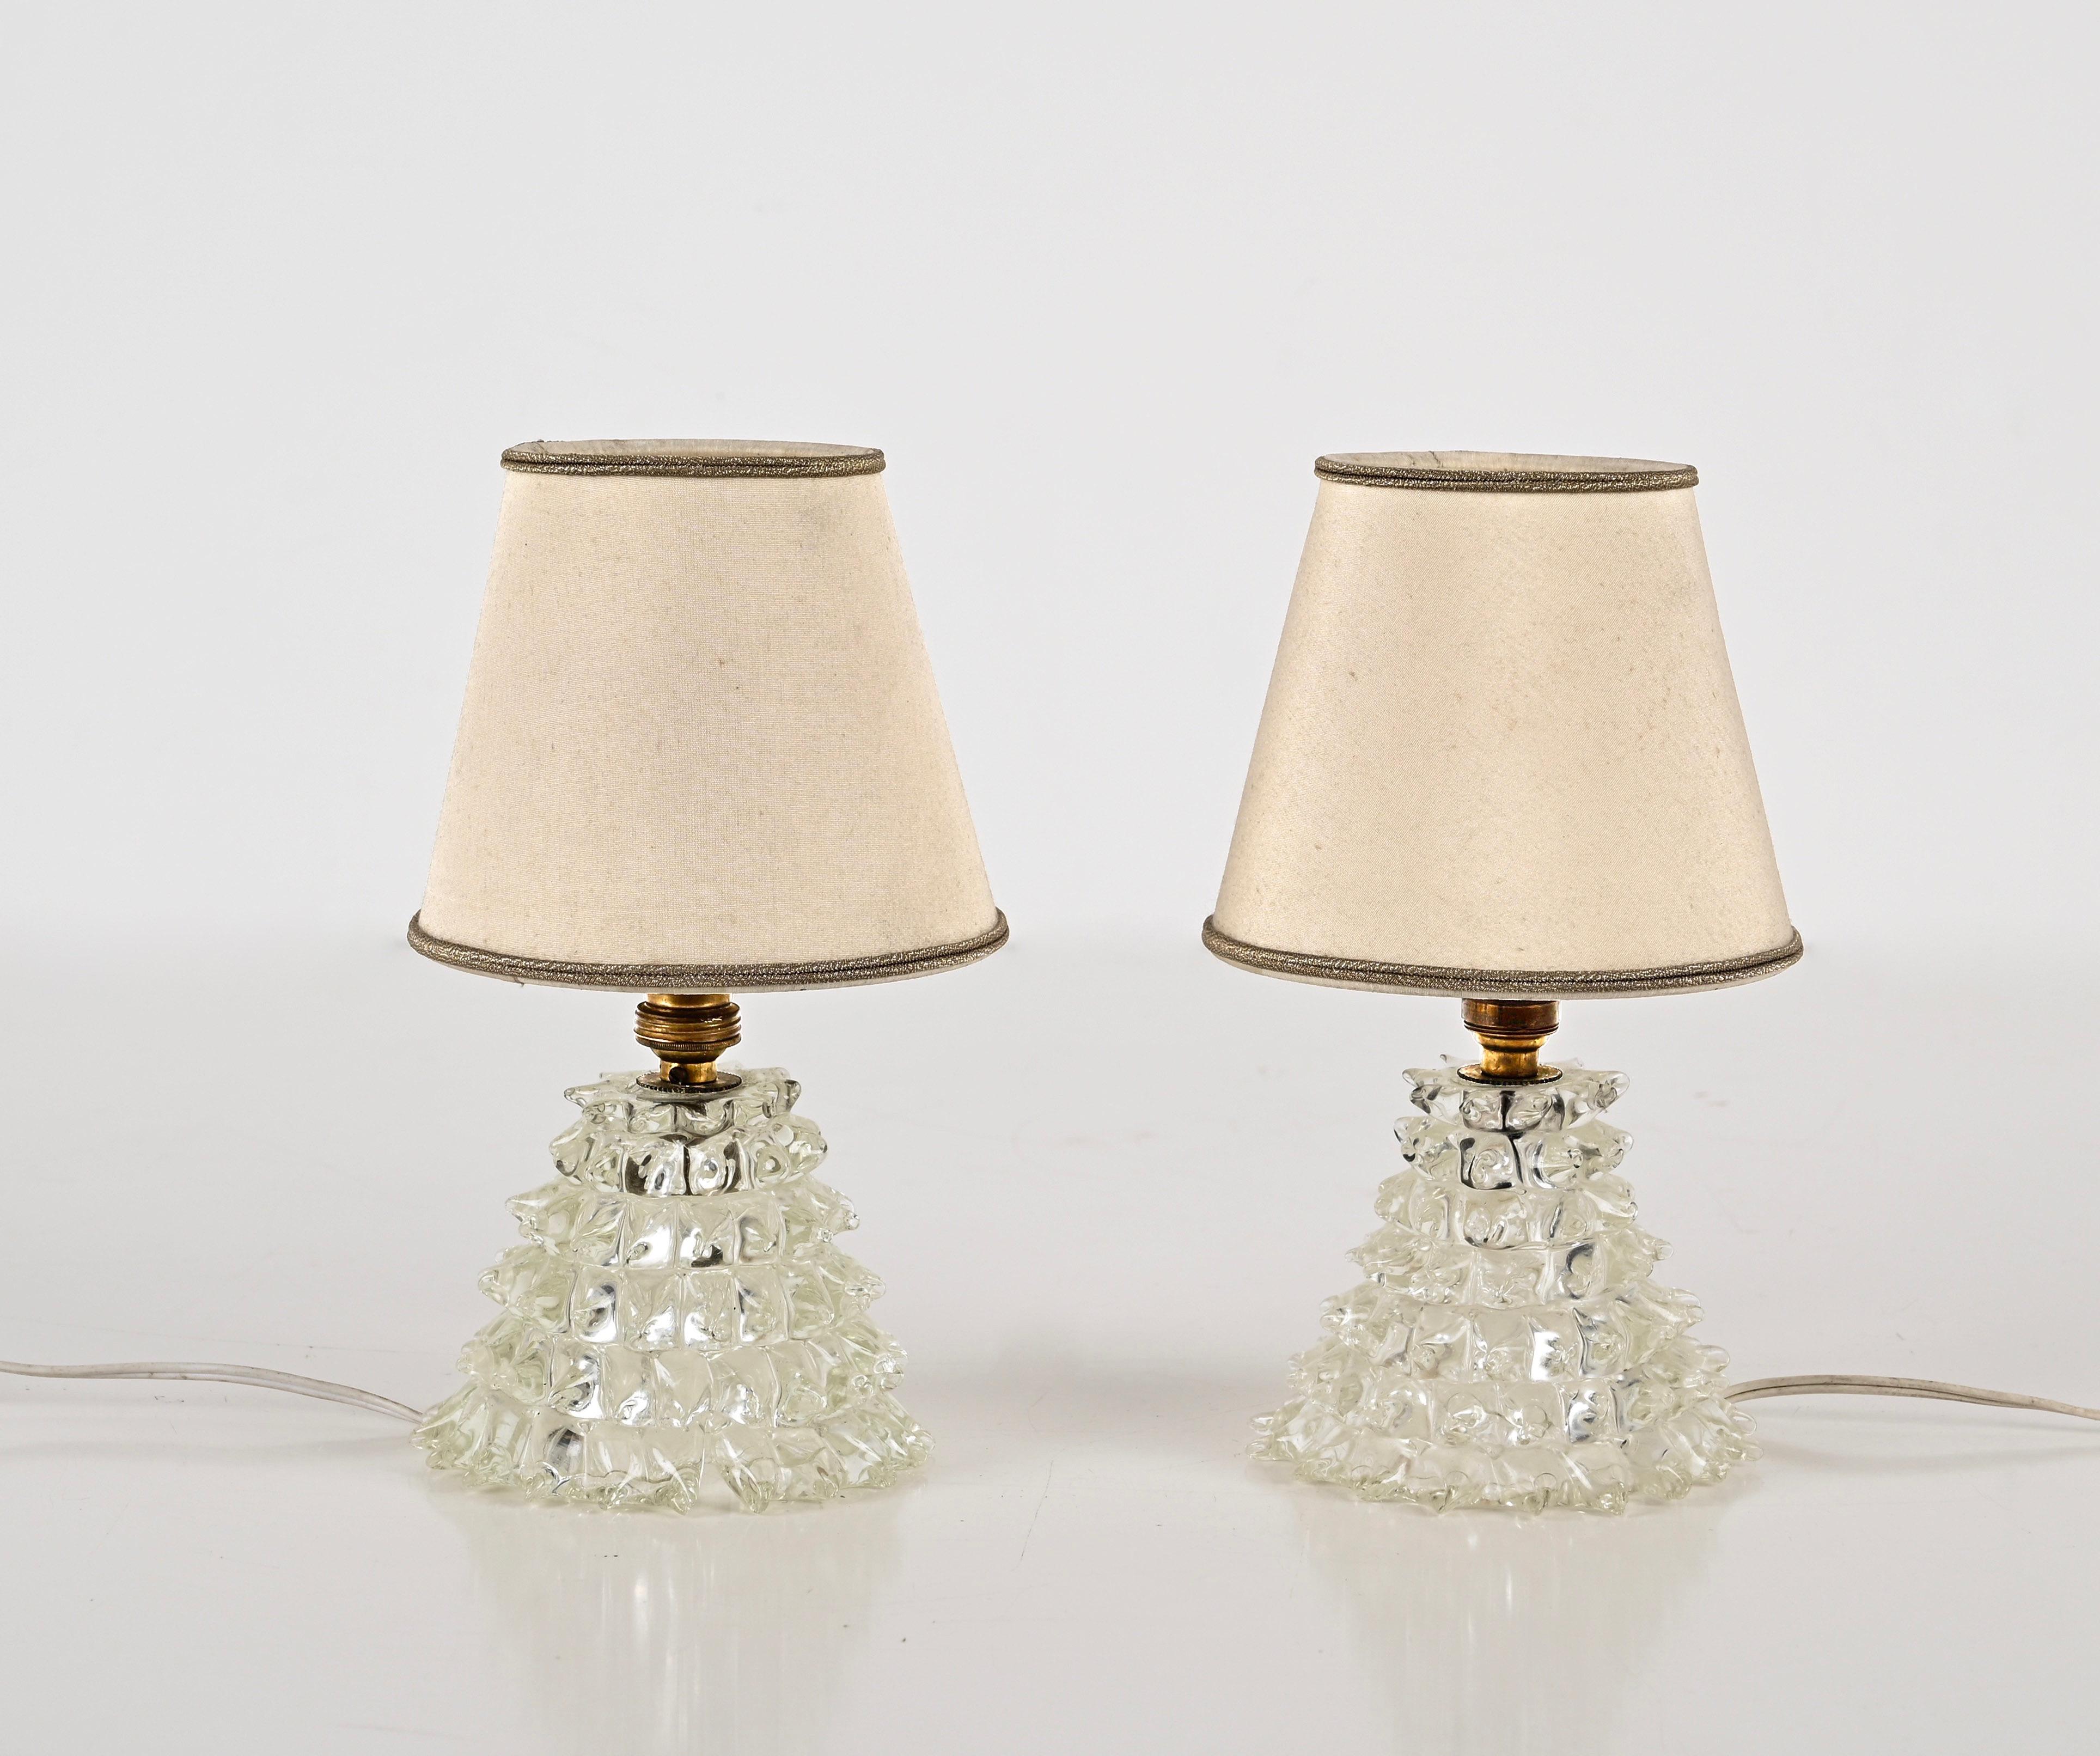 Italian Pair of Barovier Murano Rostrato Glass and Brass Table Lamps, Italy 1950s For Sale